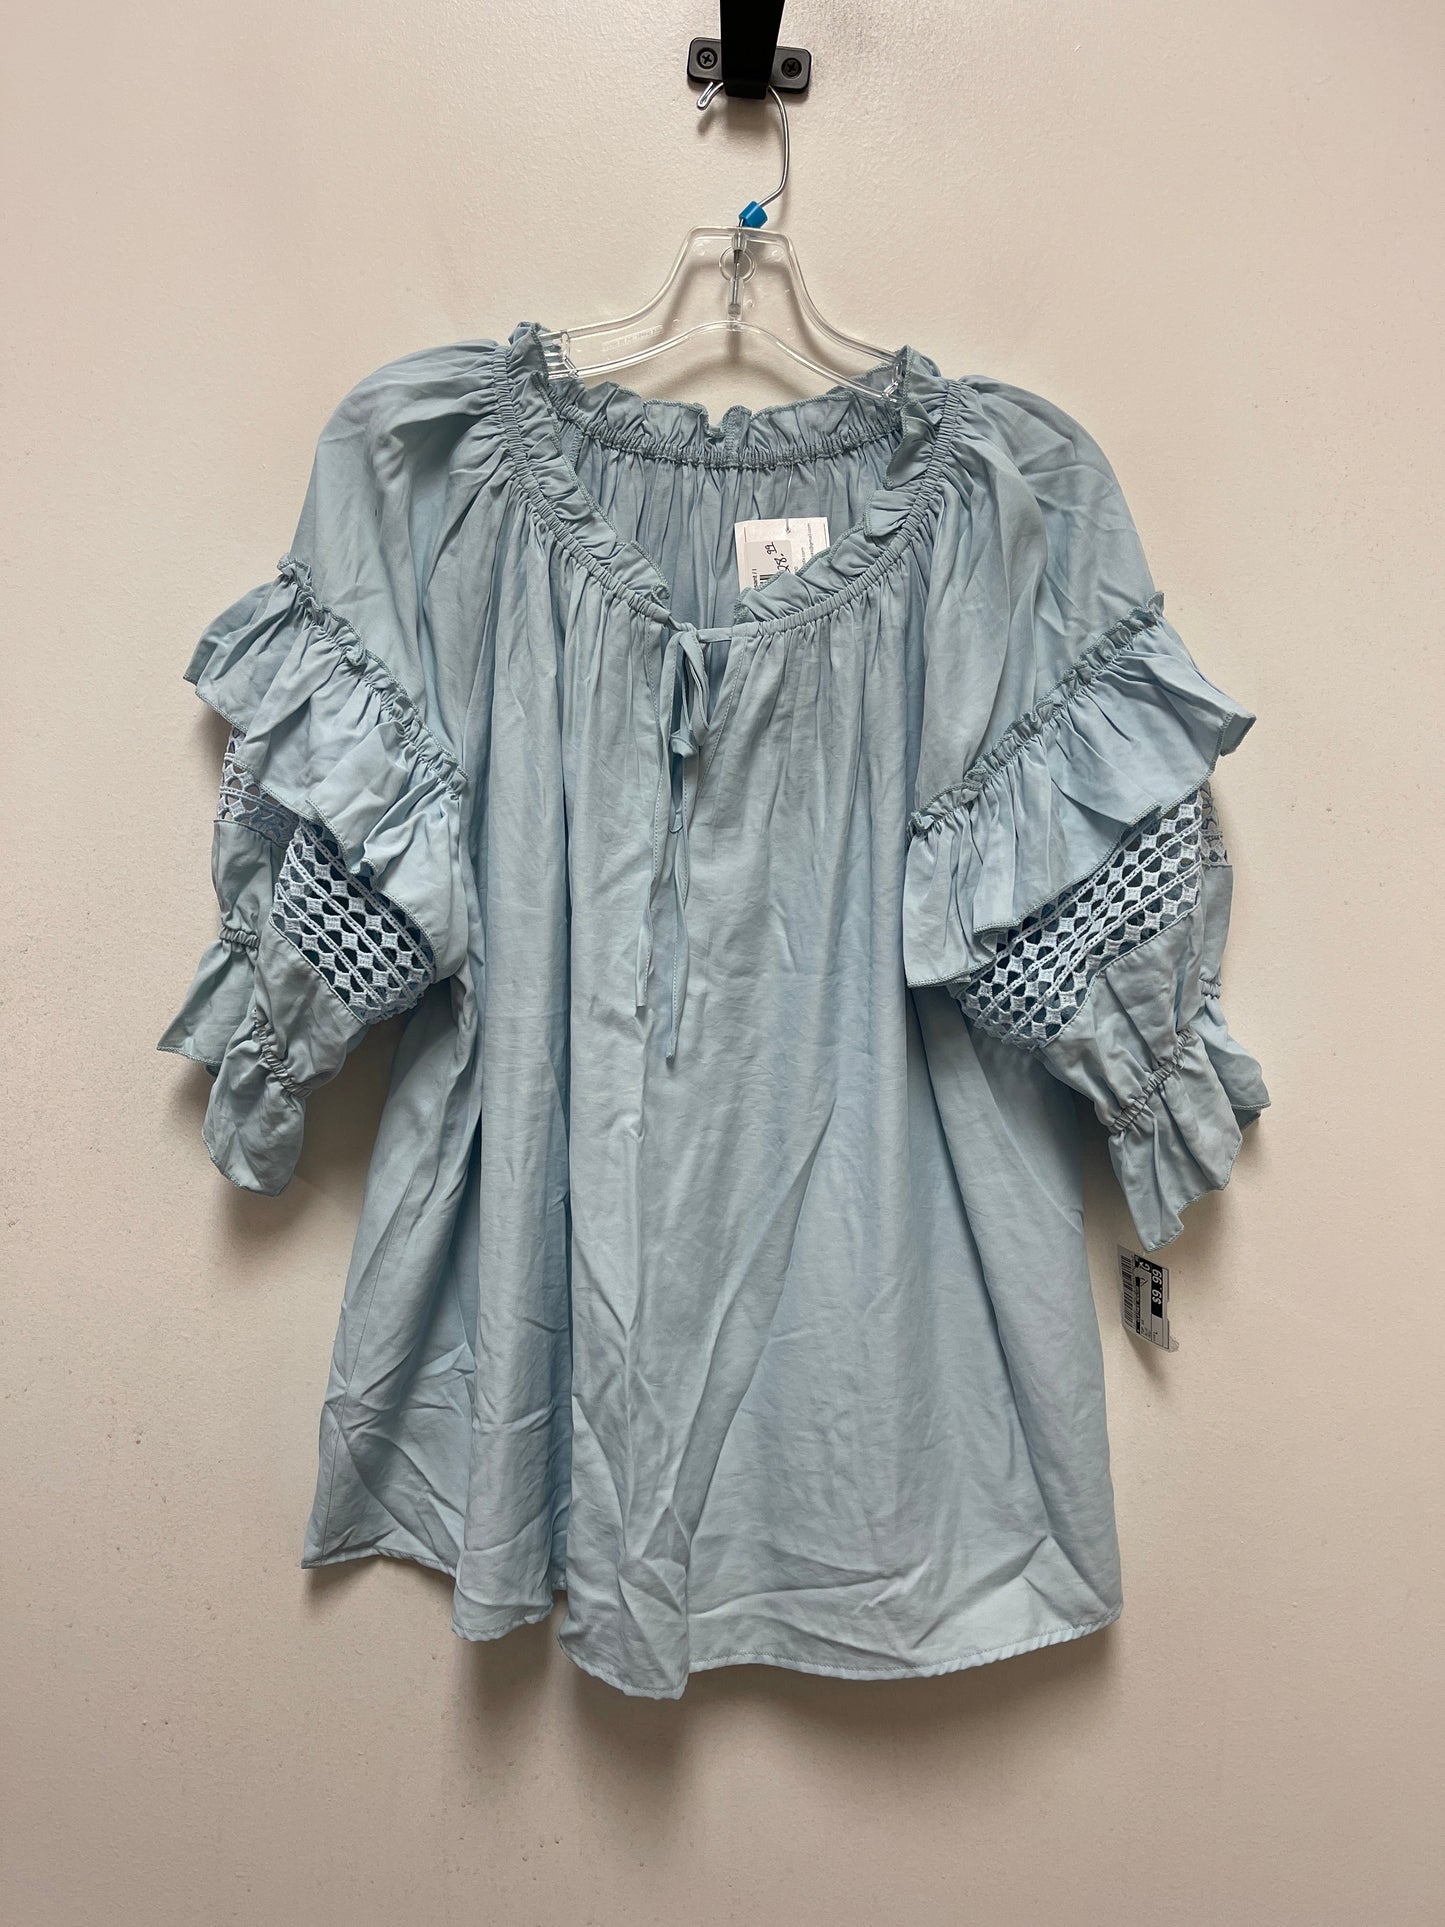 Blue Top Short Sleeve Clothes Mentor, Size L